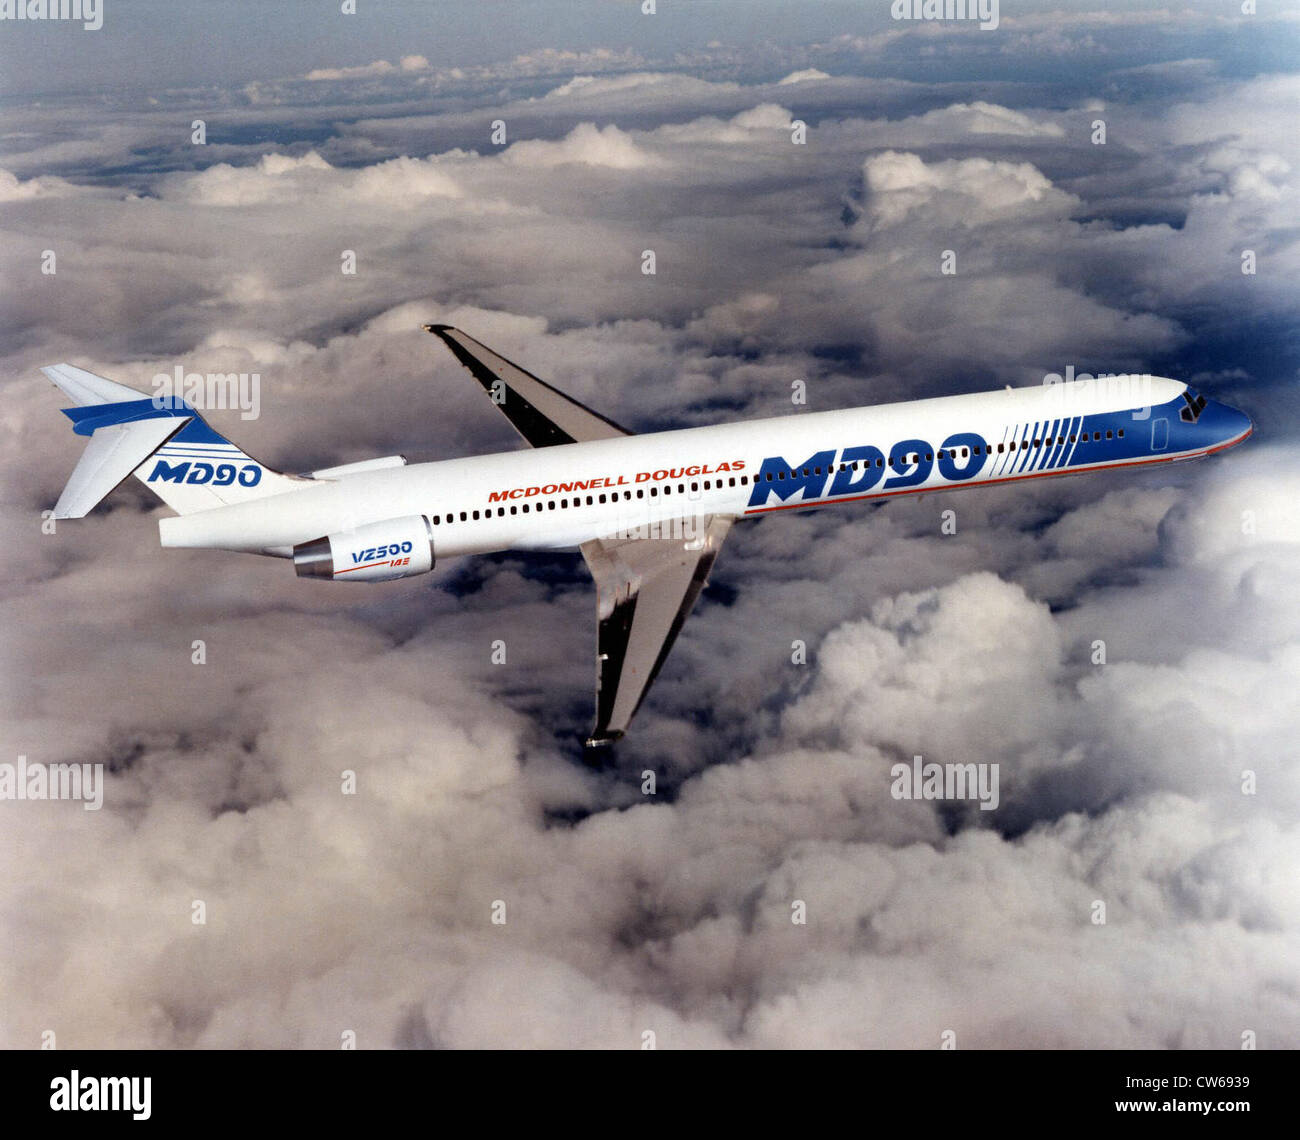 American McDonnell-Douglas MD-90 commercial transport plane Stock Photo